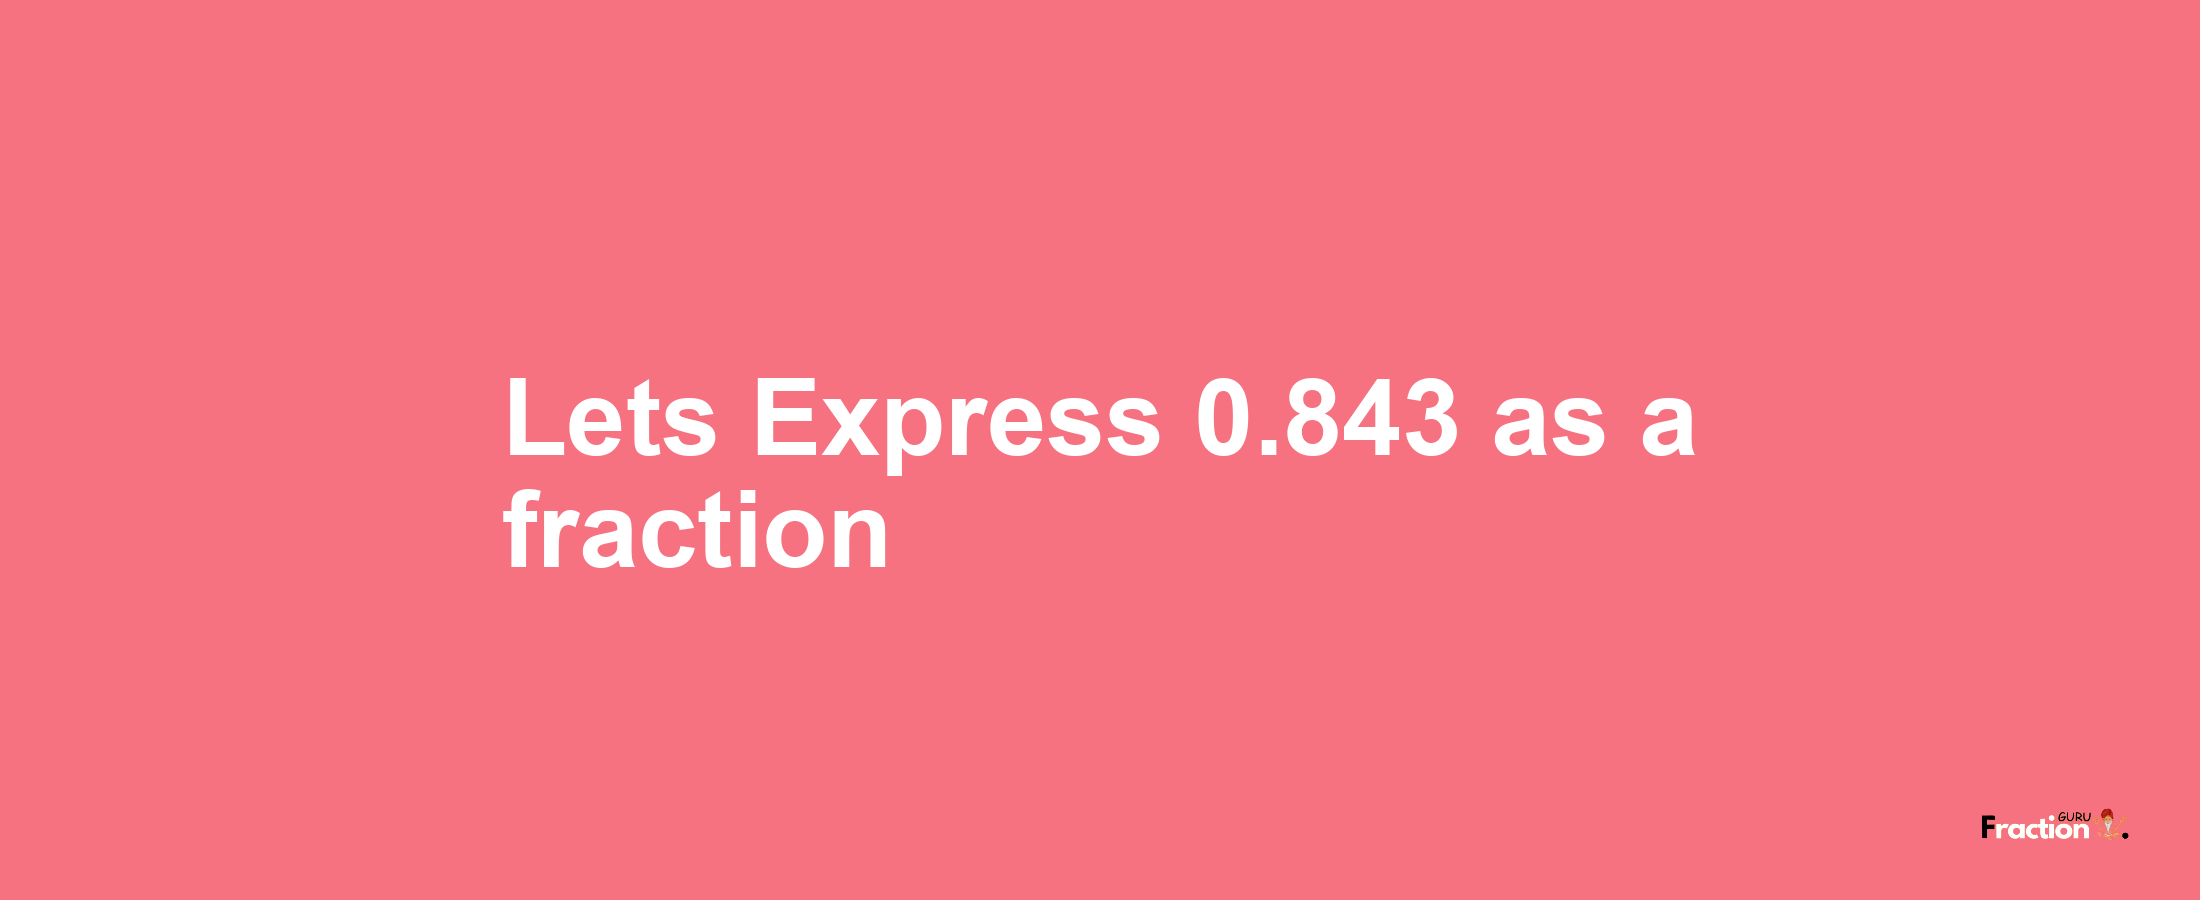 Lets Express 0.843 as afraction